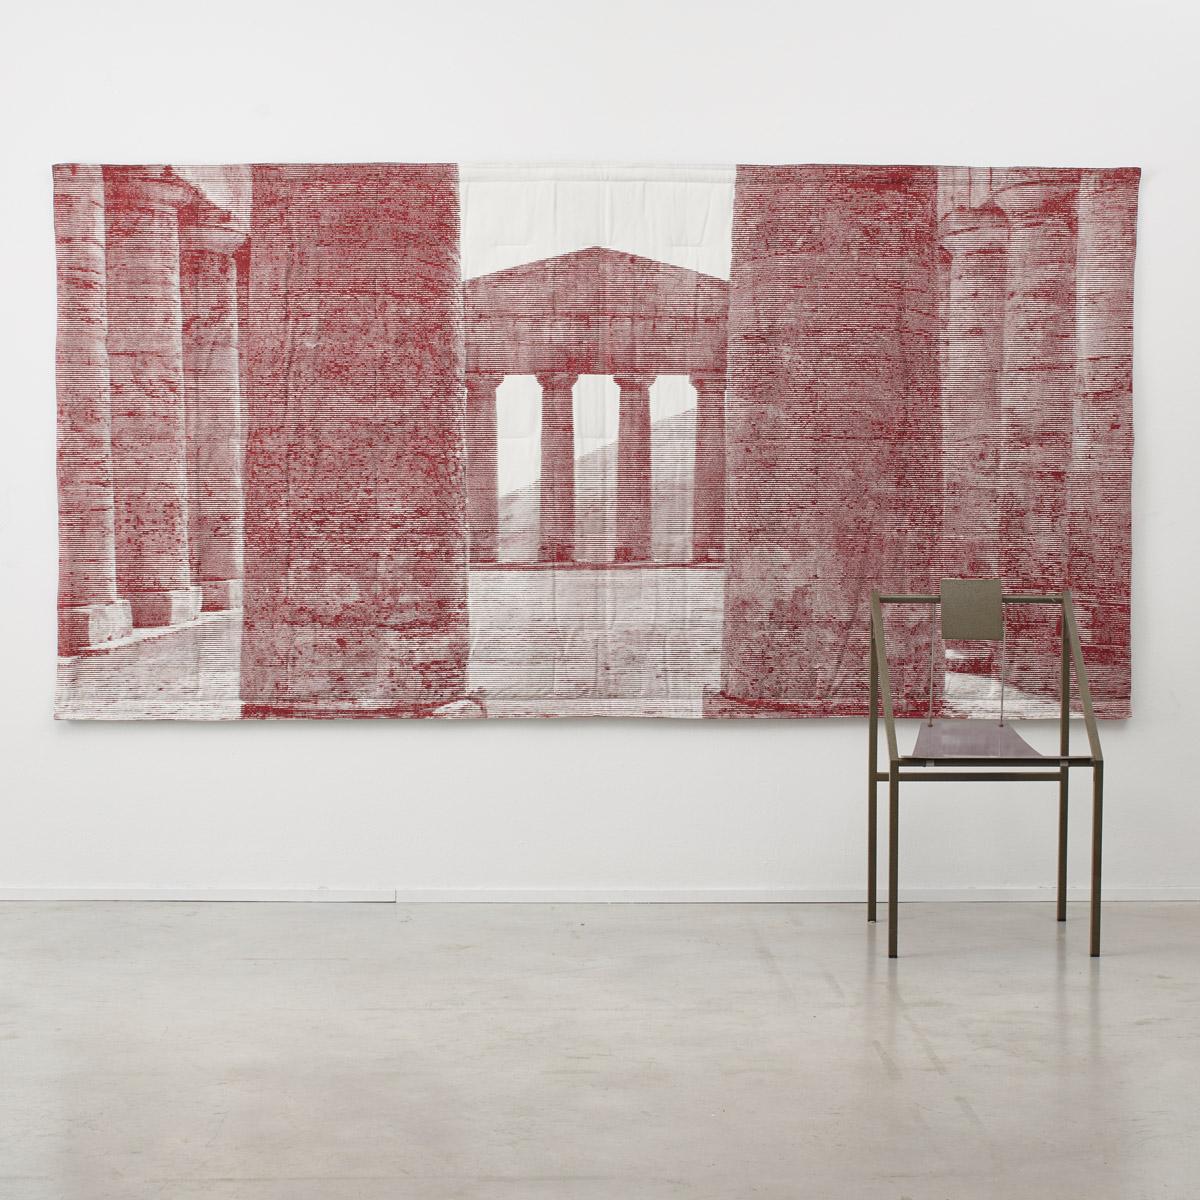 Post-Modern Enzo Mari Segusso Wall Hanging by FLOU, Italy, 2000